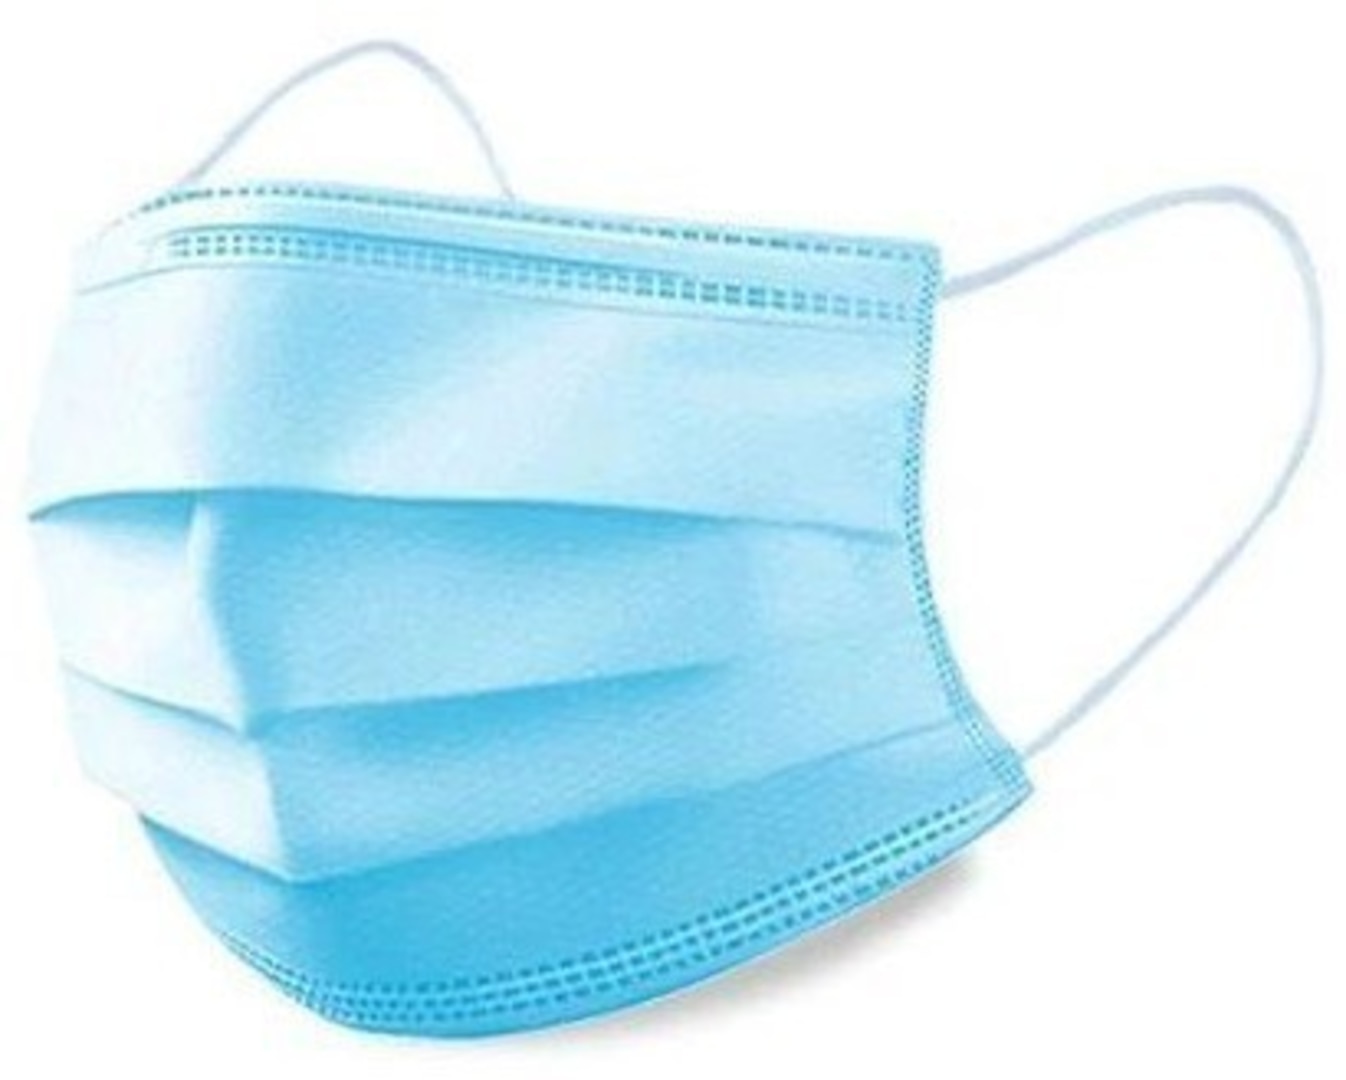 Commissaries worldwide are now selling reusable and disposable protective masks.